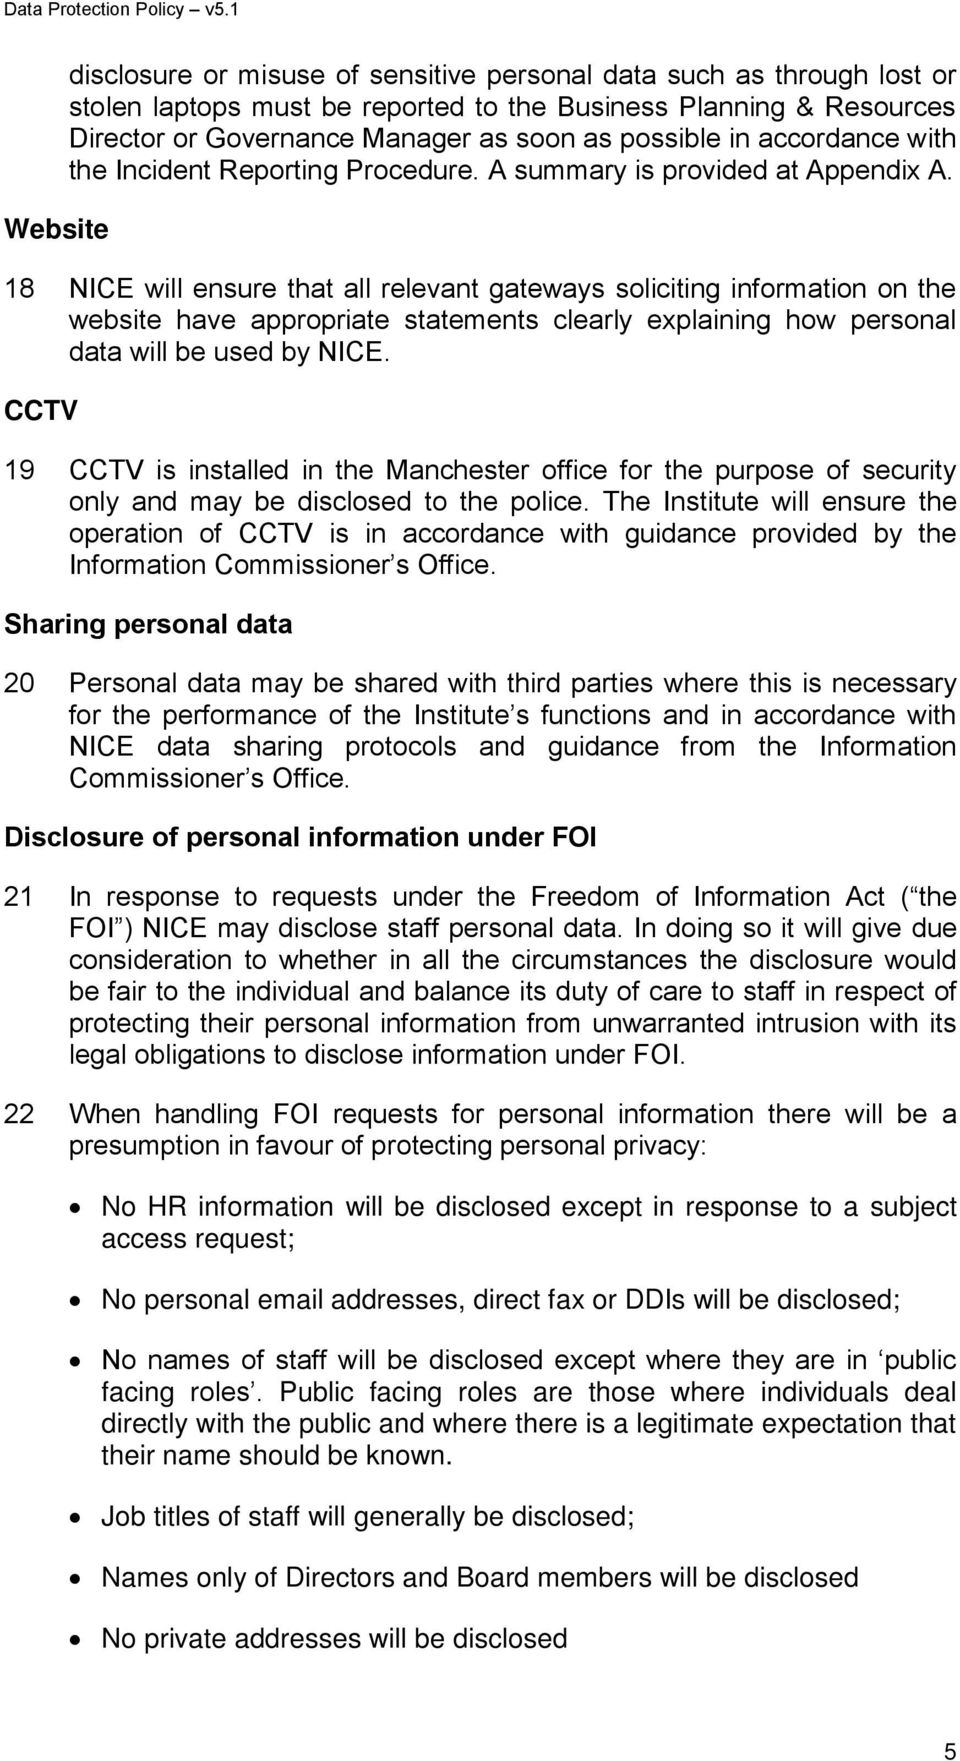 18 NICE will ensure that all relevant gateways soliciting information on the website have appropriate statements clearly explaining how personal data will be used by NICE.